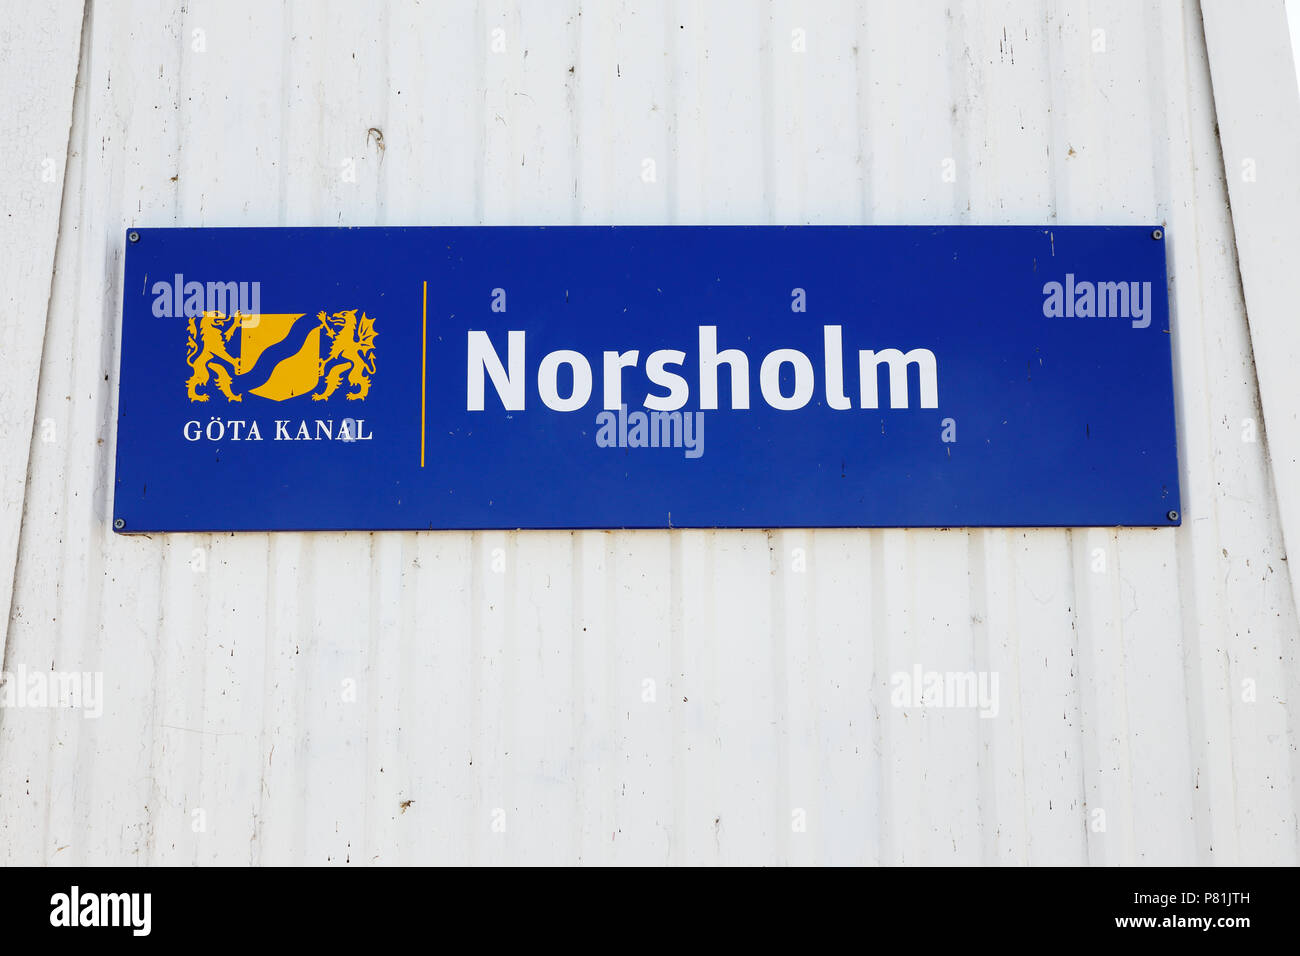 Norsholm, Sweden - July 5, 2018: Blue sign on white wooden wall at the entrance to the Norsholm locking aera in the Gota canal. Stock Photo